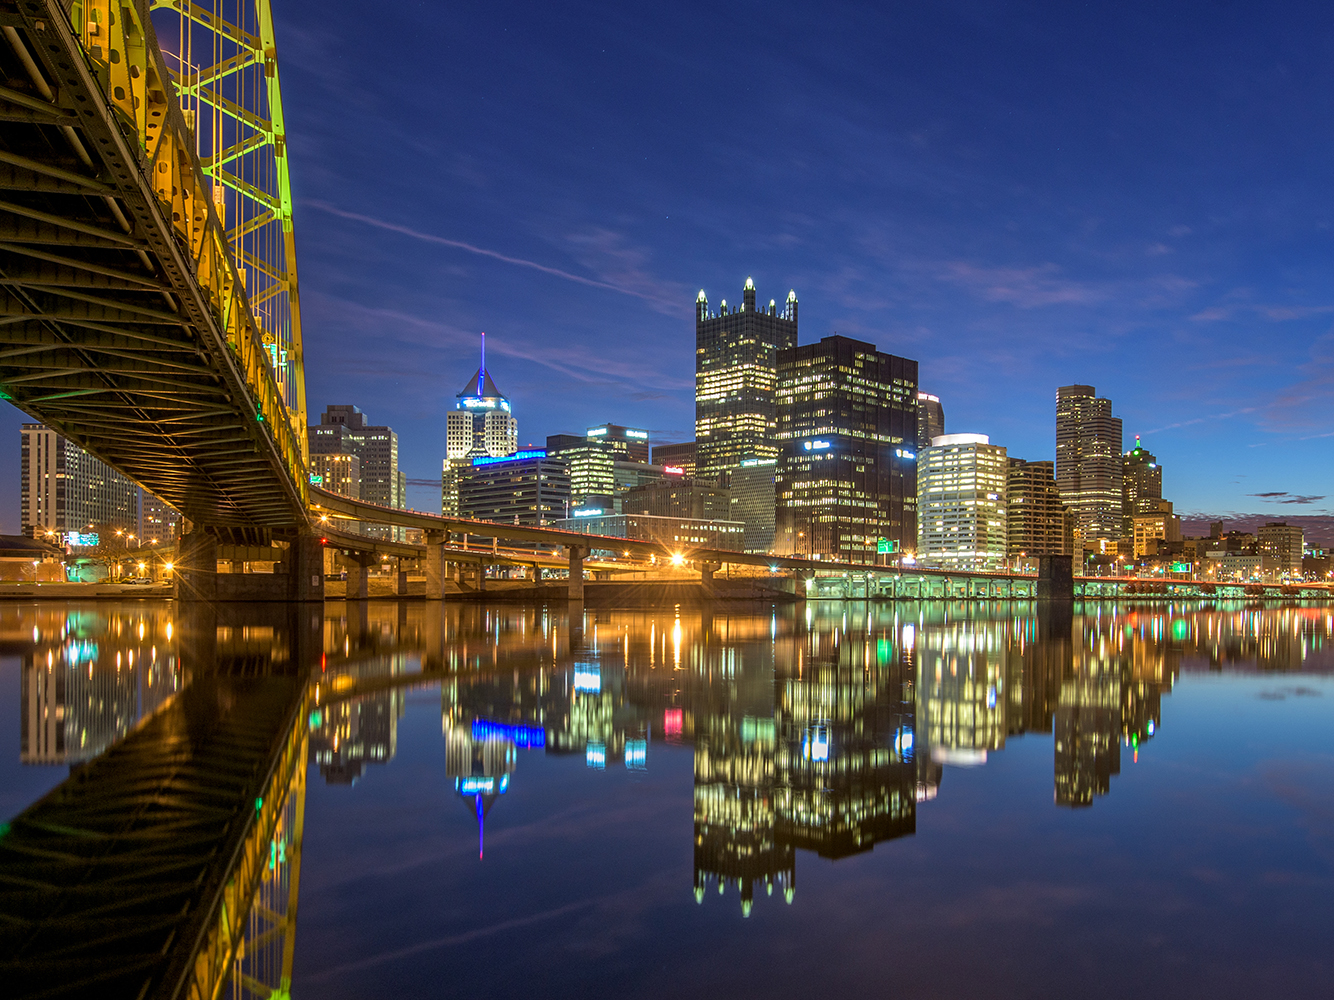 Pictured is Downtown Pittsburgh at night. Photo by Dave DiCello.